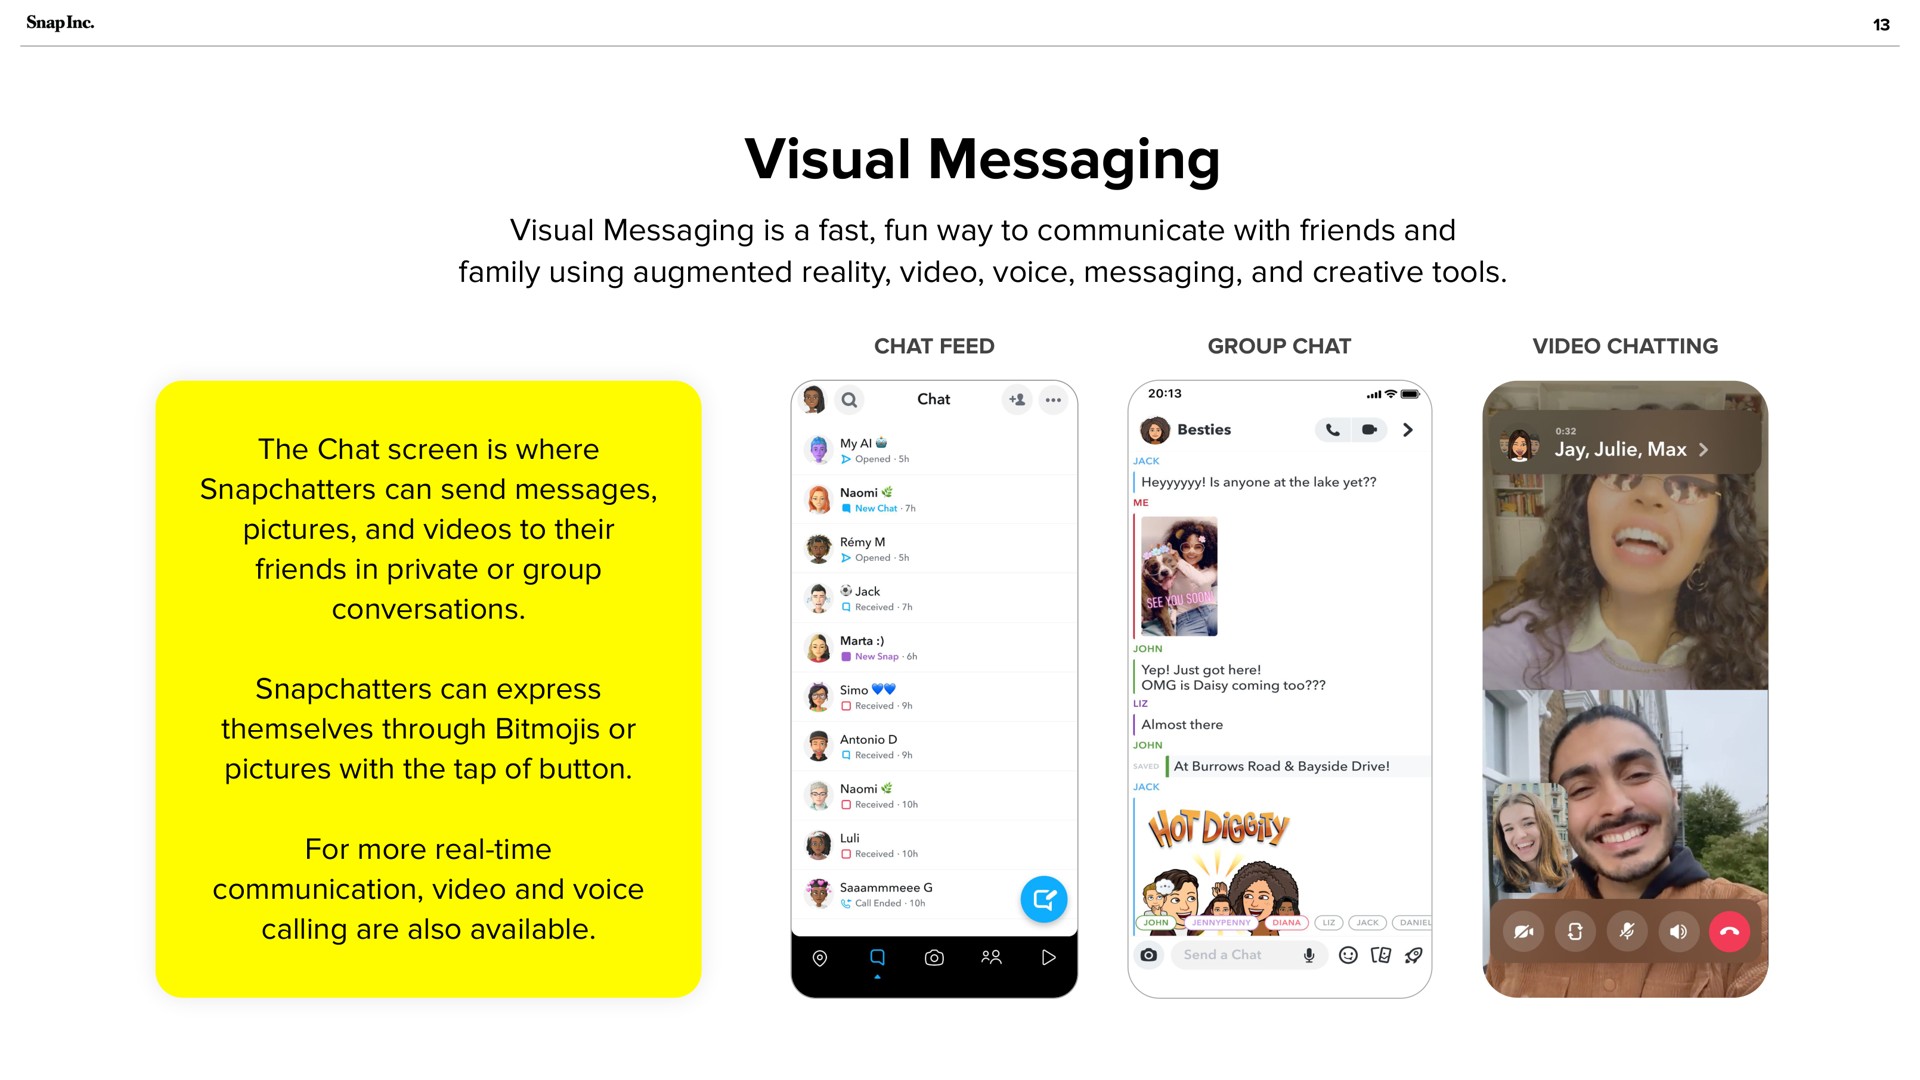 visual messaging a conversations can express for more real time calling are also available steam eat coming yor a one | Snap Inc